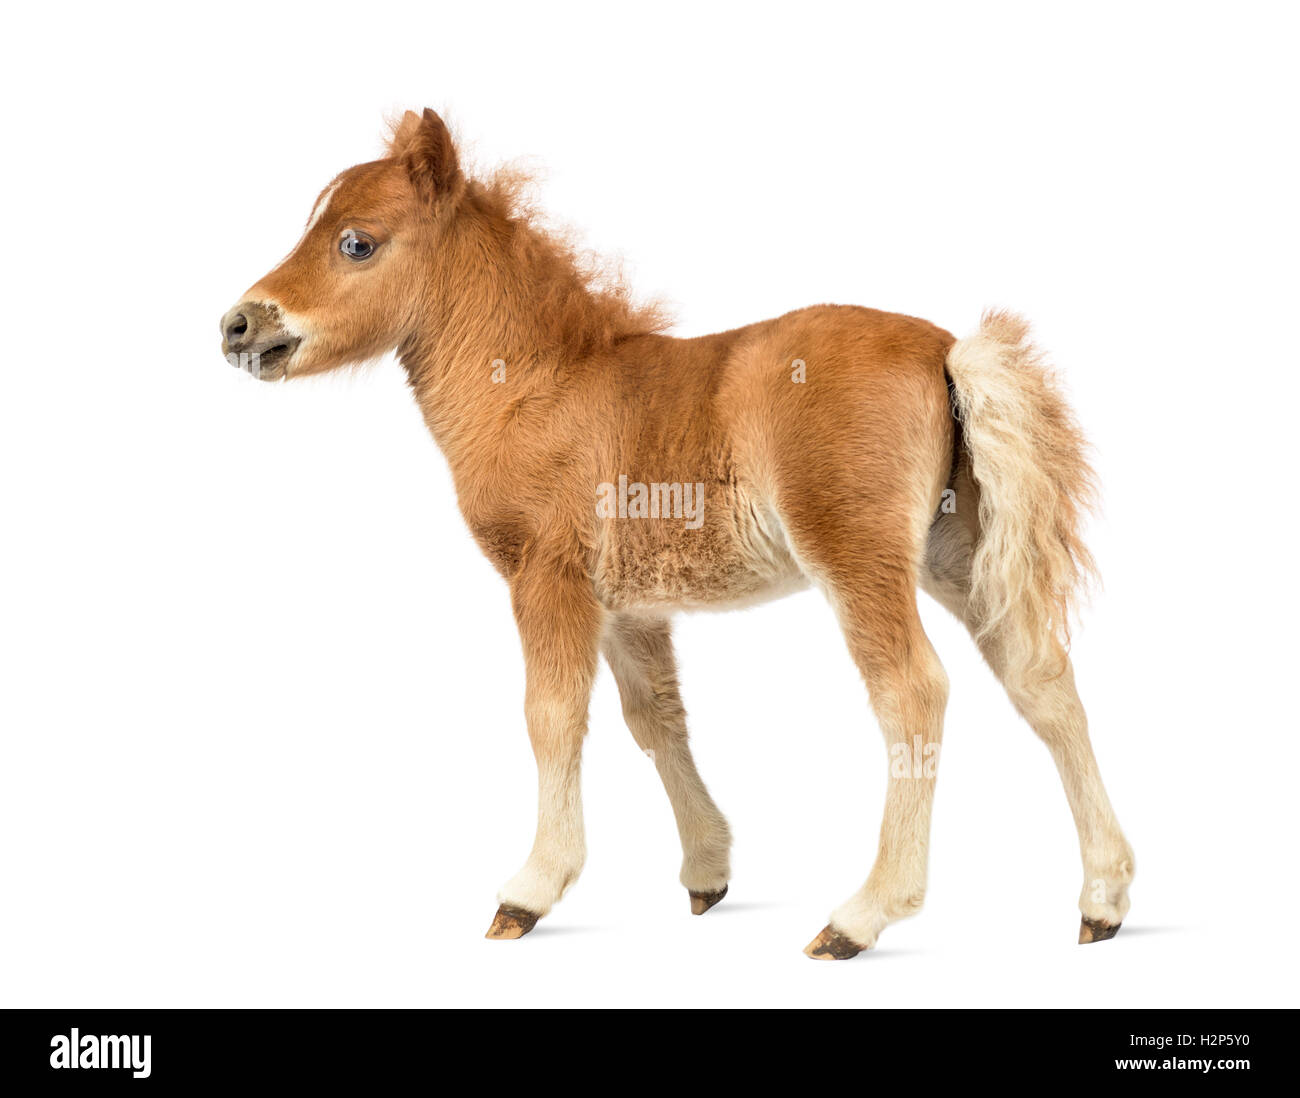 Rear view of a young poney, foal against white background Stock Photo